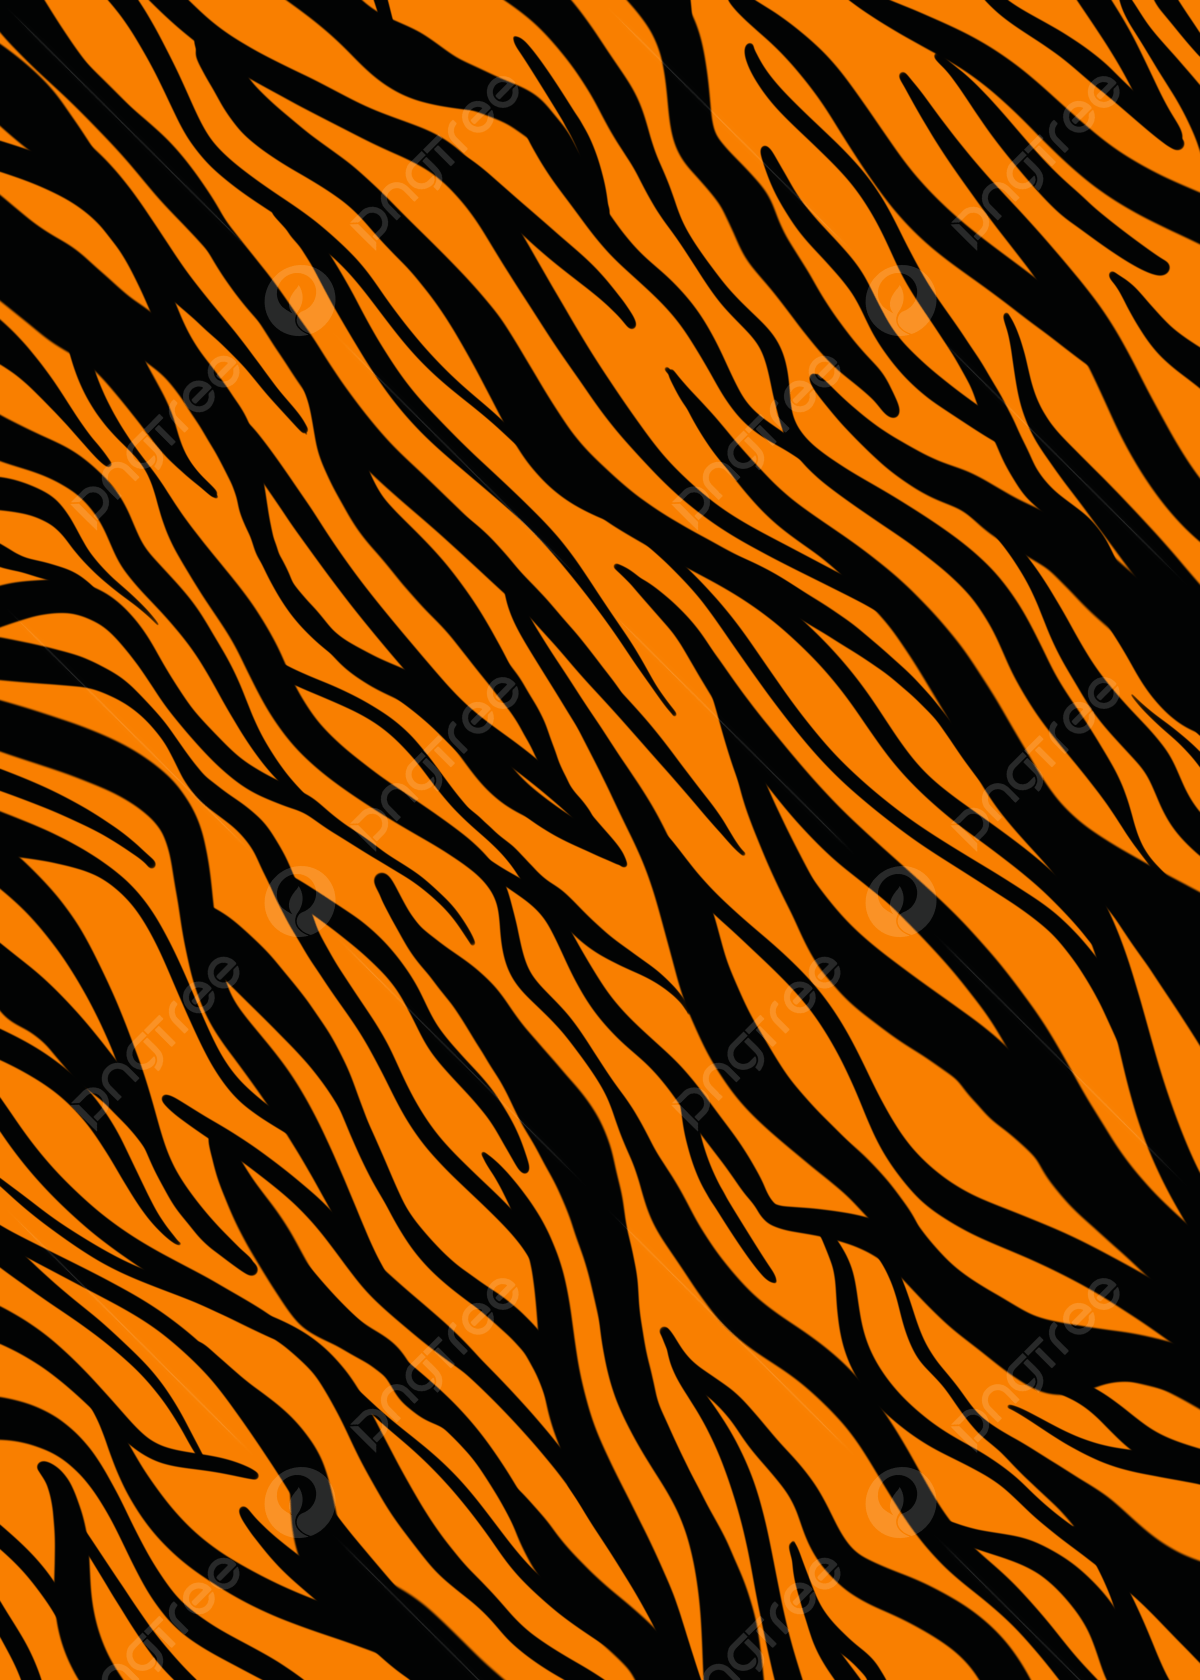 Tiger Stripes Wallpapers - Top Free Tiger Stripes Backgrounds ...